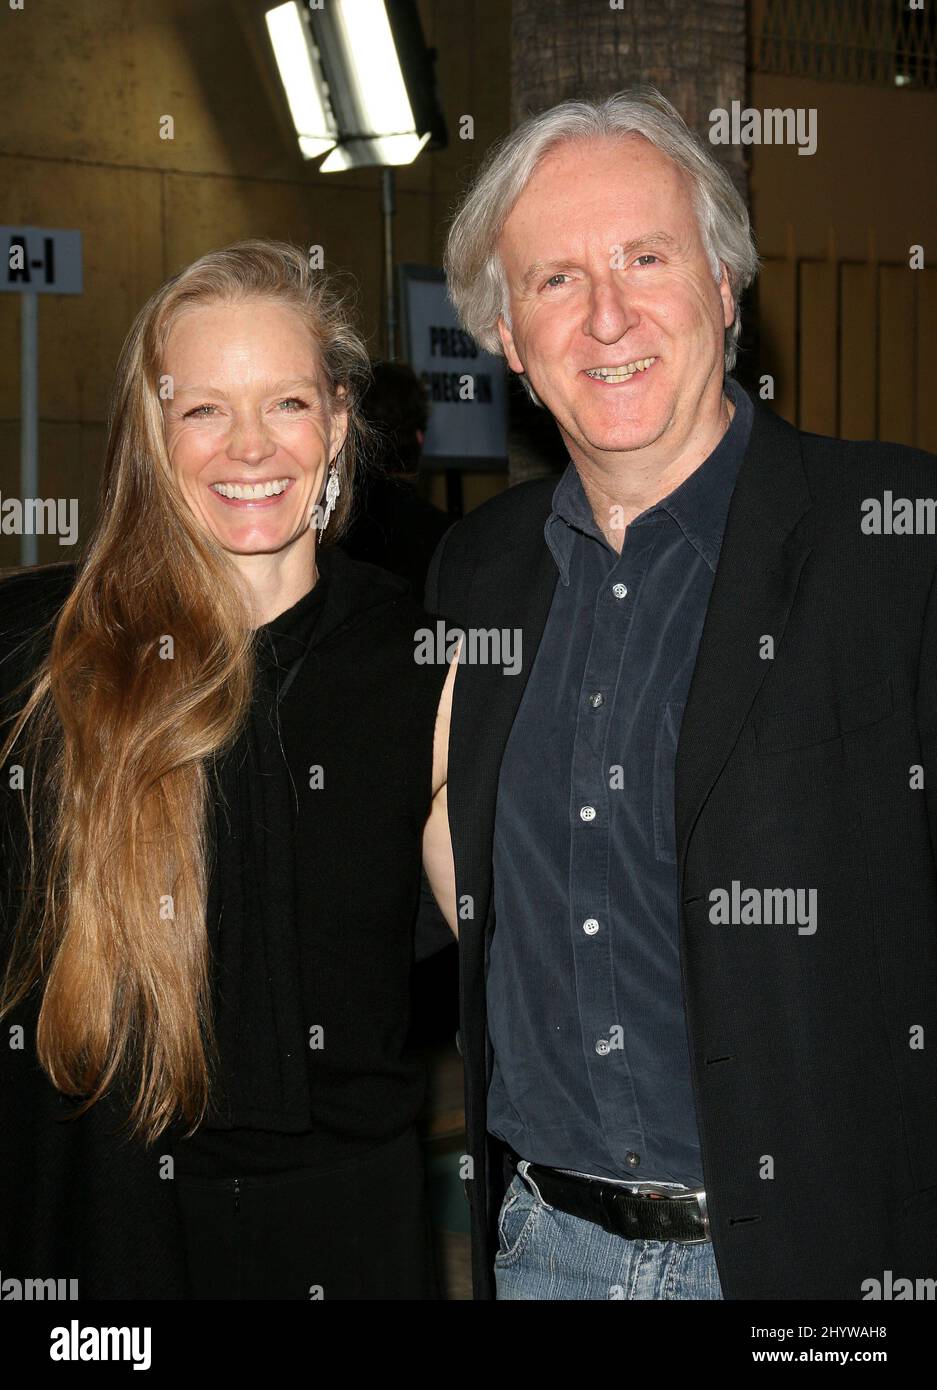 Suzy Amis and James Cameron at the premiere of 'The Hurt Locker' held at the Egyptian Theatre, Los Angeles. Stock Photo